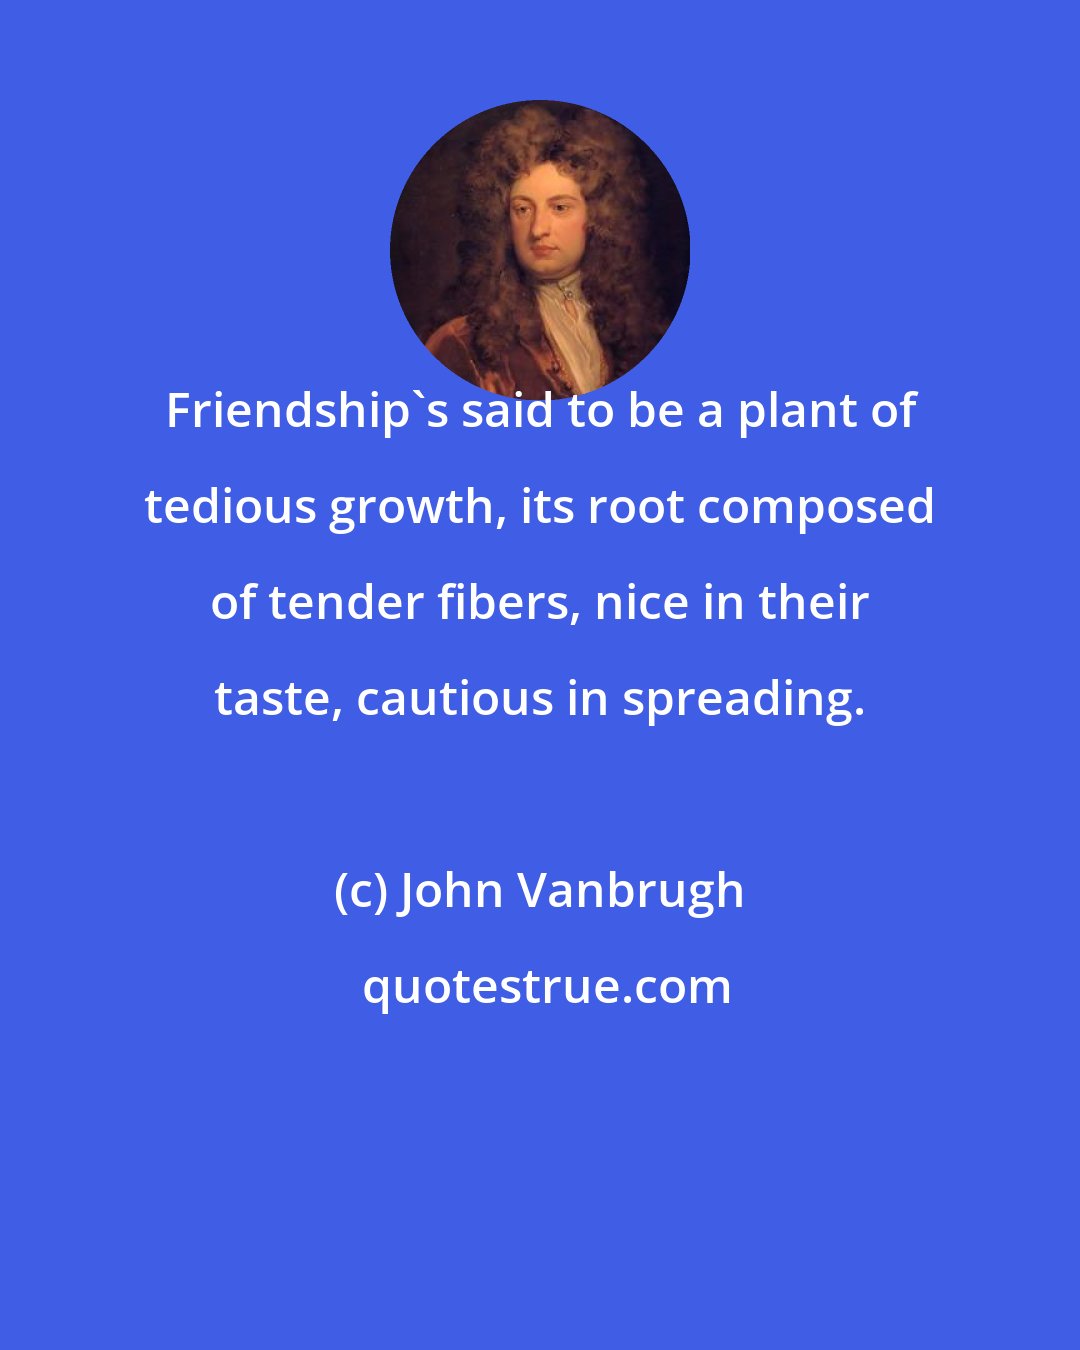 John Vanbrugh: Friendship's said to be a plant of tedious growth, its root composed of tender fibers, nice in their taste, cautious in spreading.